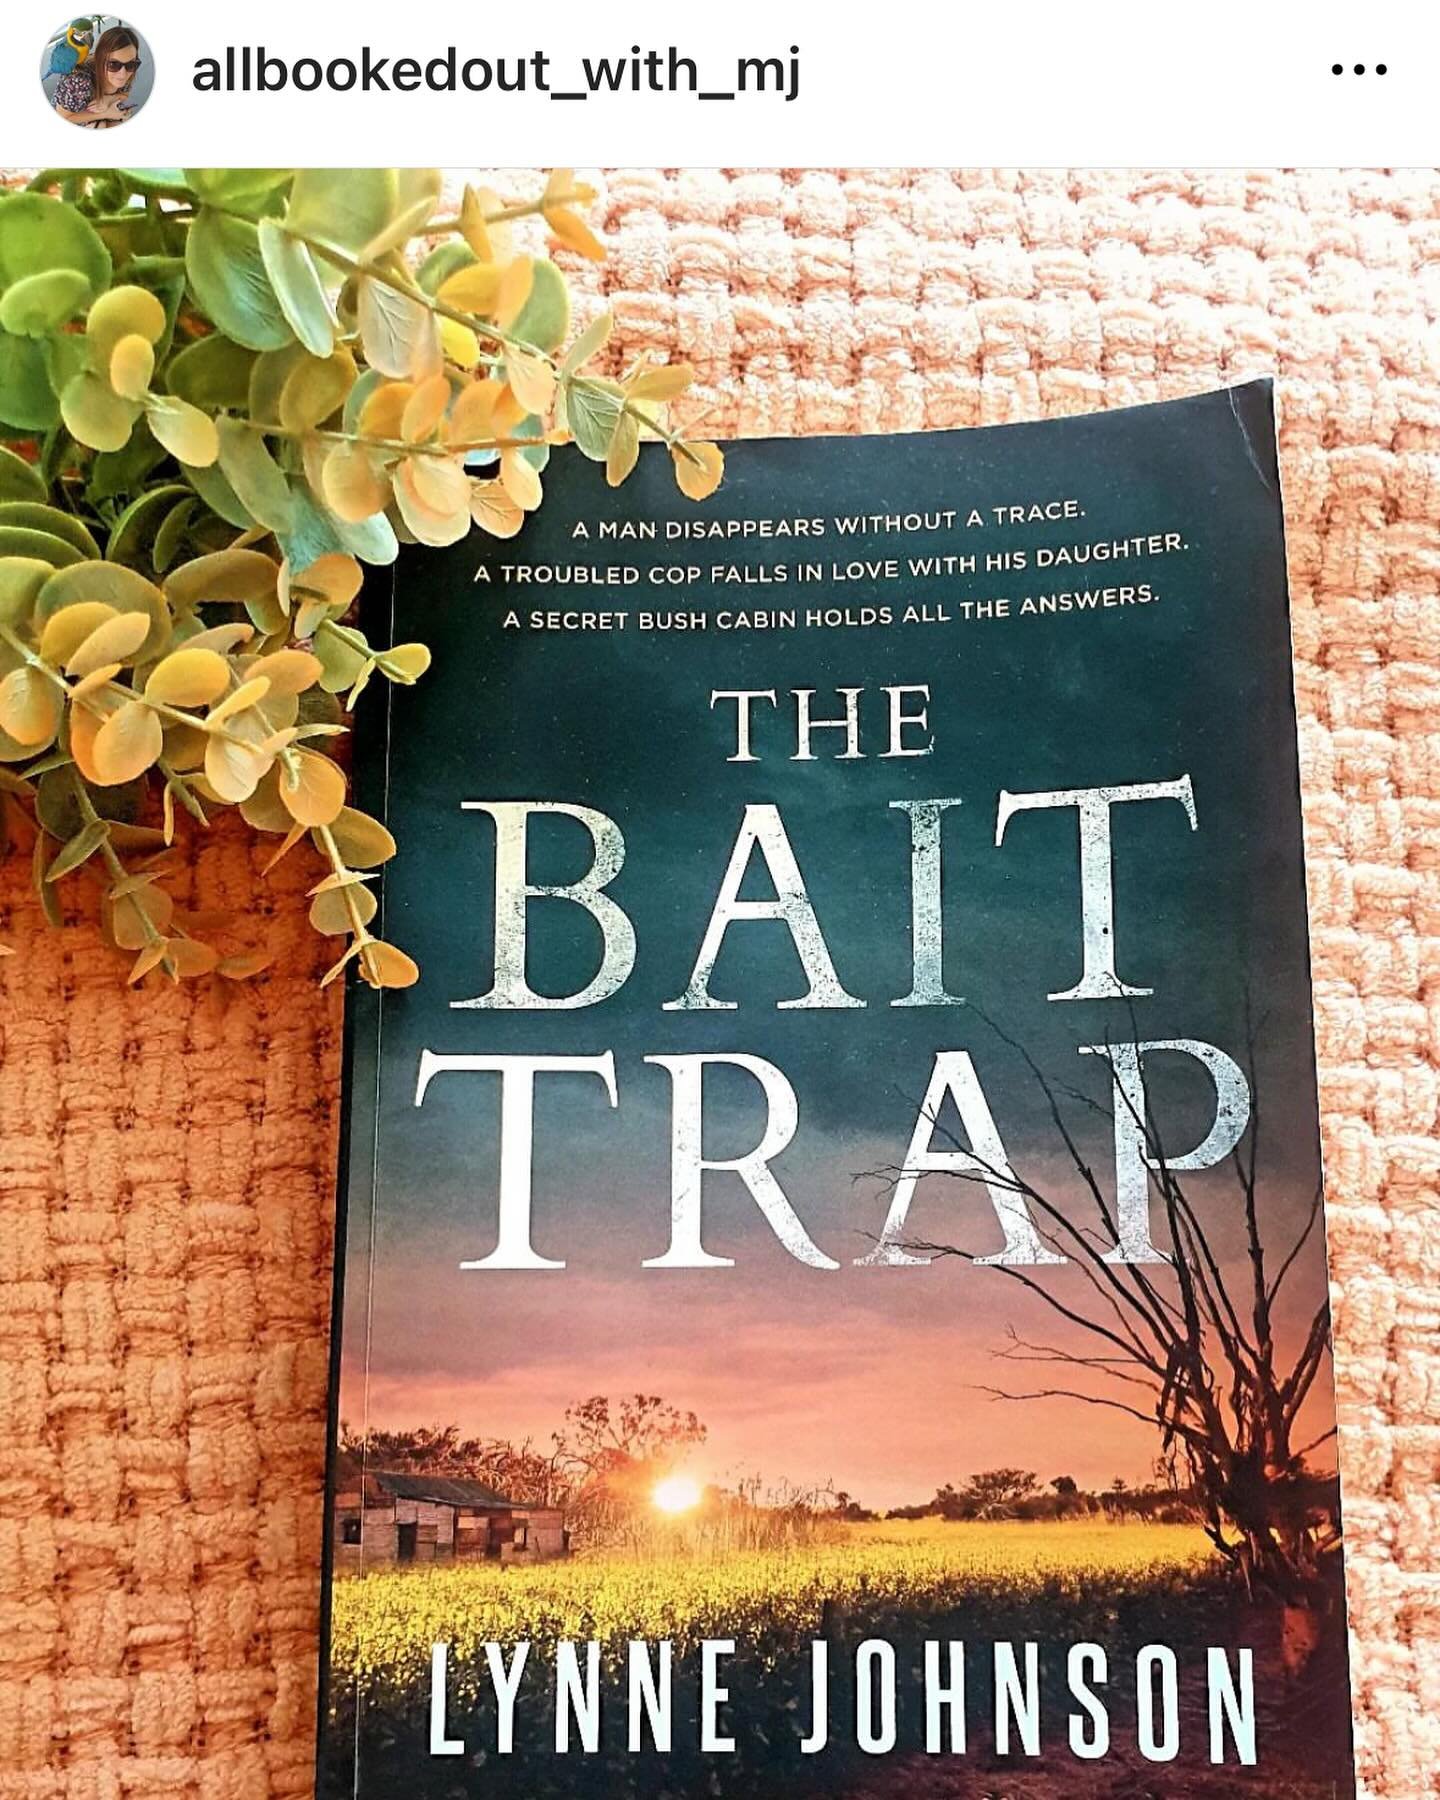 I couldn&rsquo;t have hoped for a better review from @allbookedout_with_mj ! Thanks for buddy reading The Bait Trap with @bookish_tk 📚&rsquo;&hellip;a fantastic debut rural crime novel &hellip;neither of us picked the ending.&rsquo; 
#thebaittrap #l